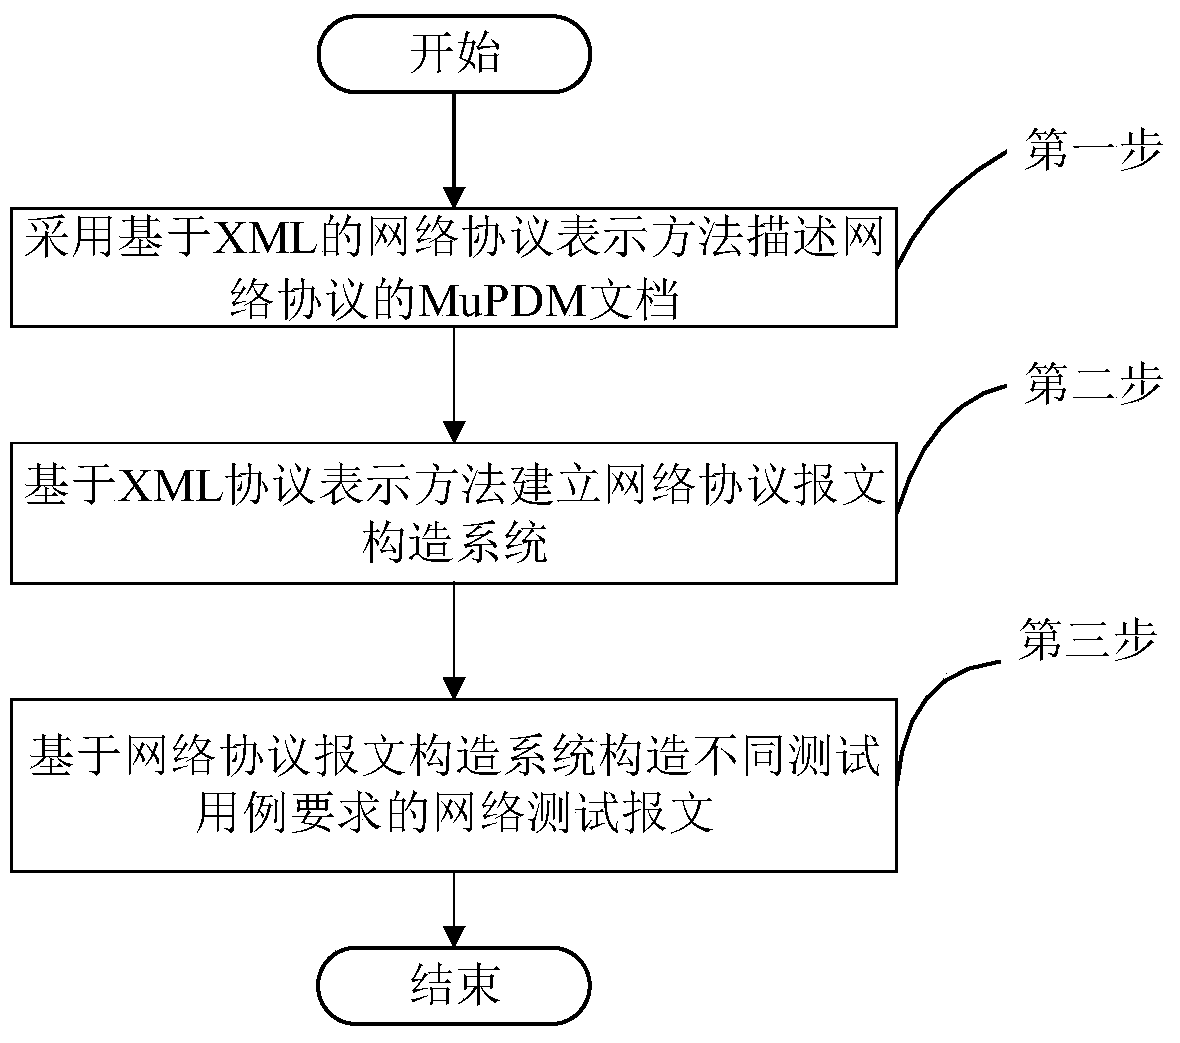 A message construction method based on xml network protocol representation